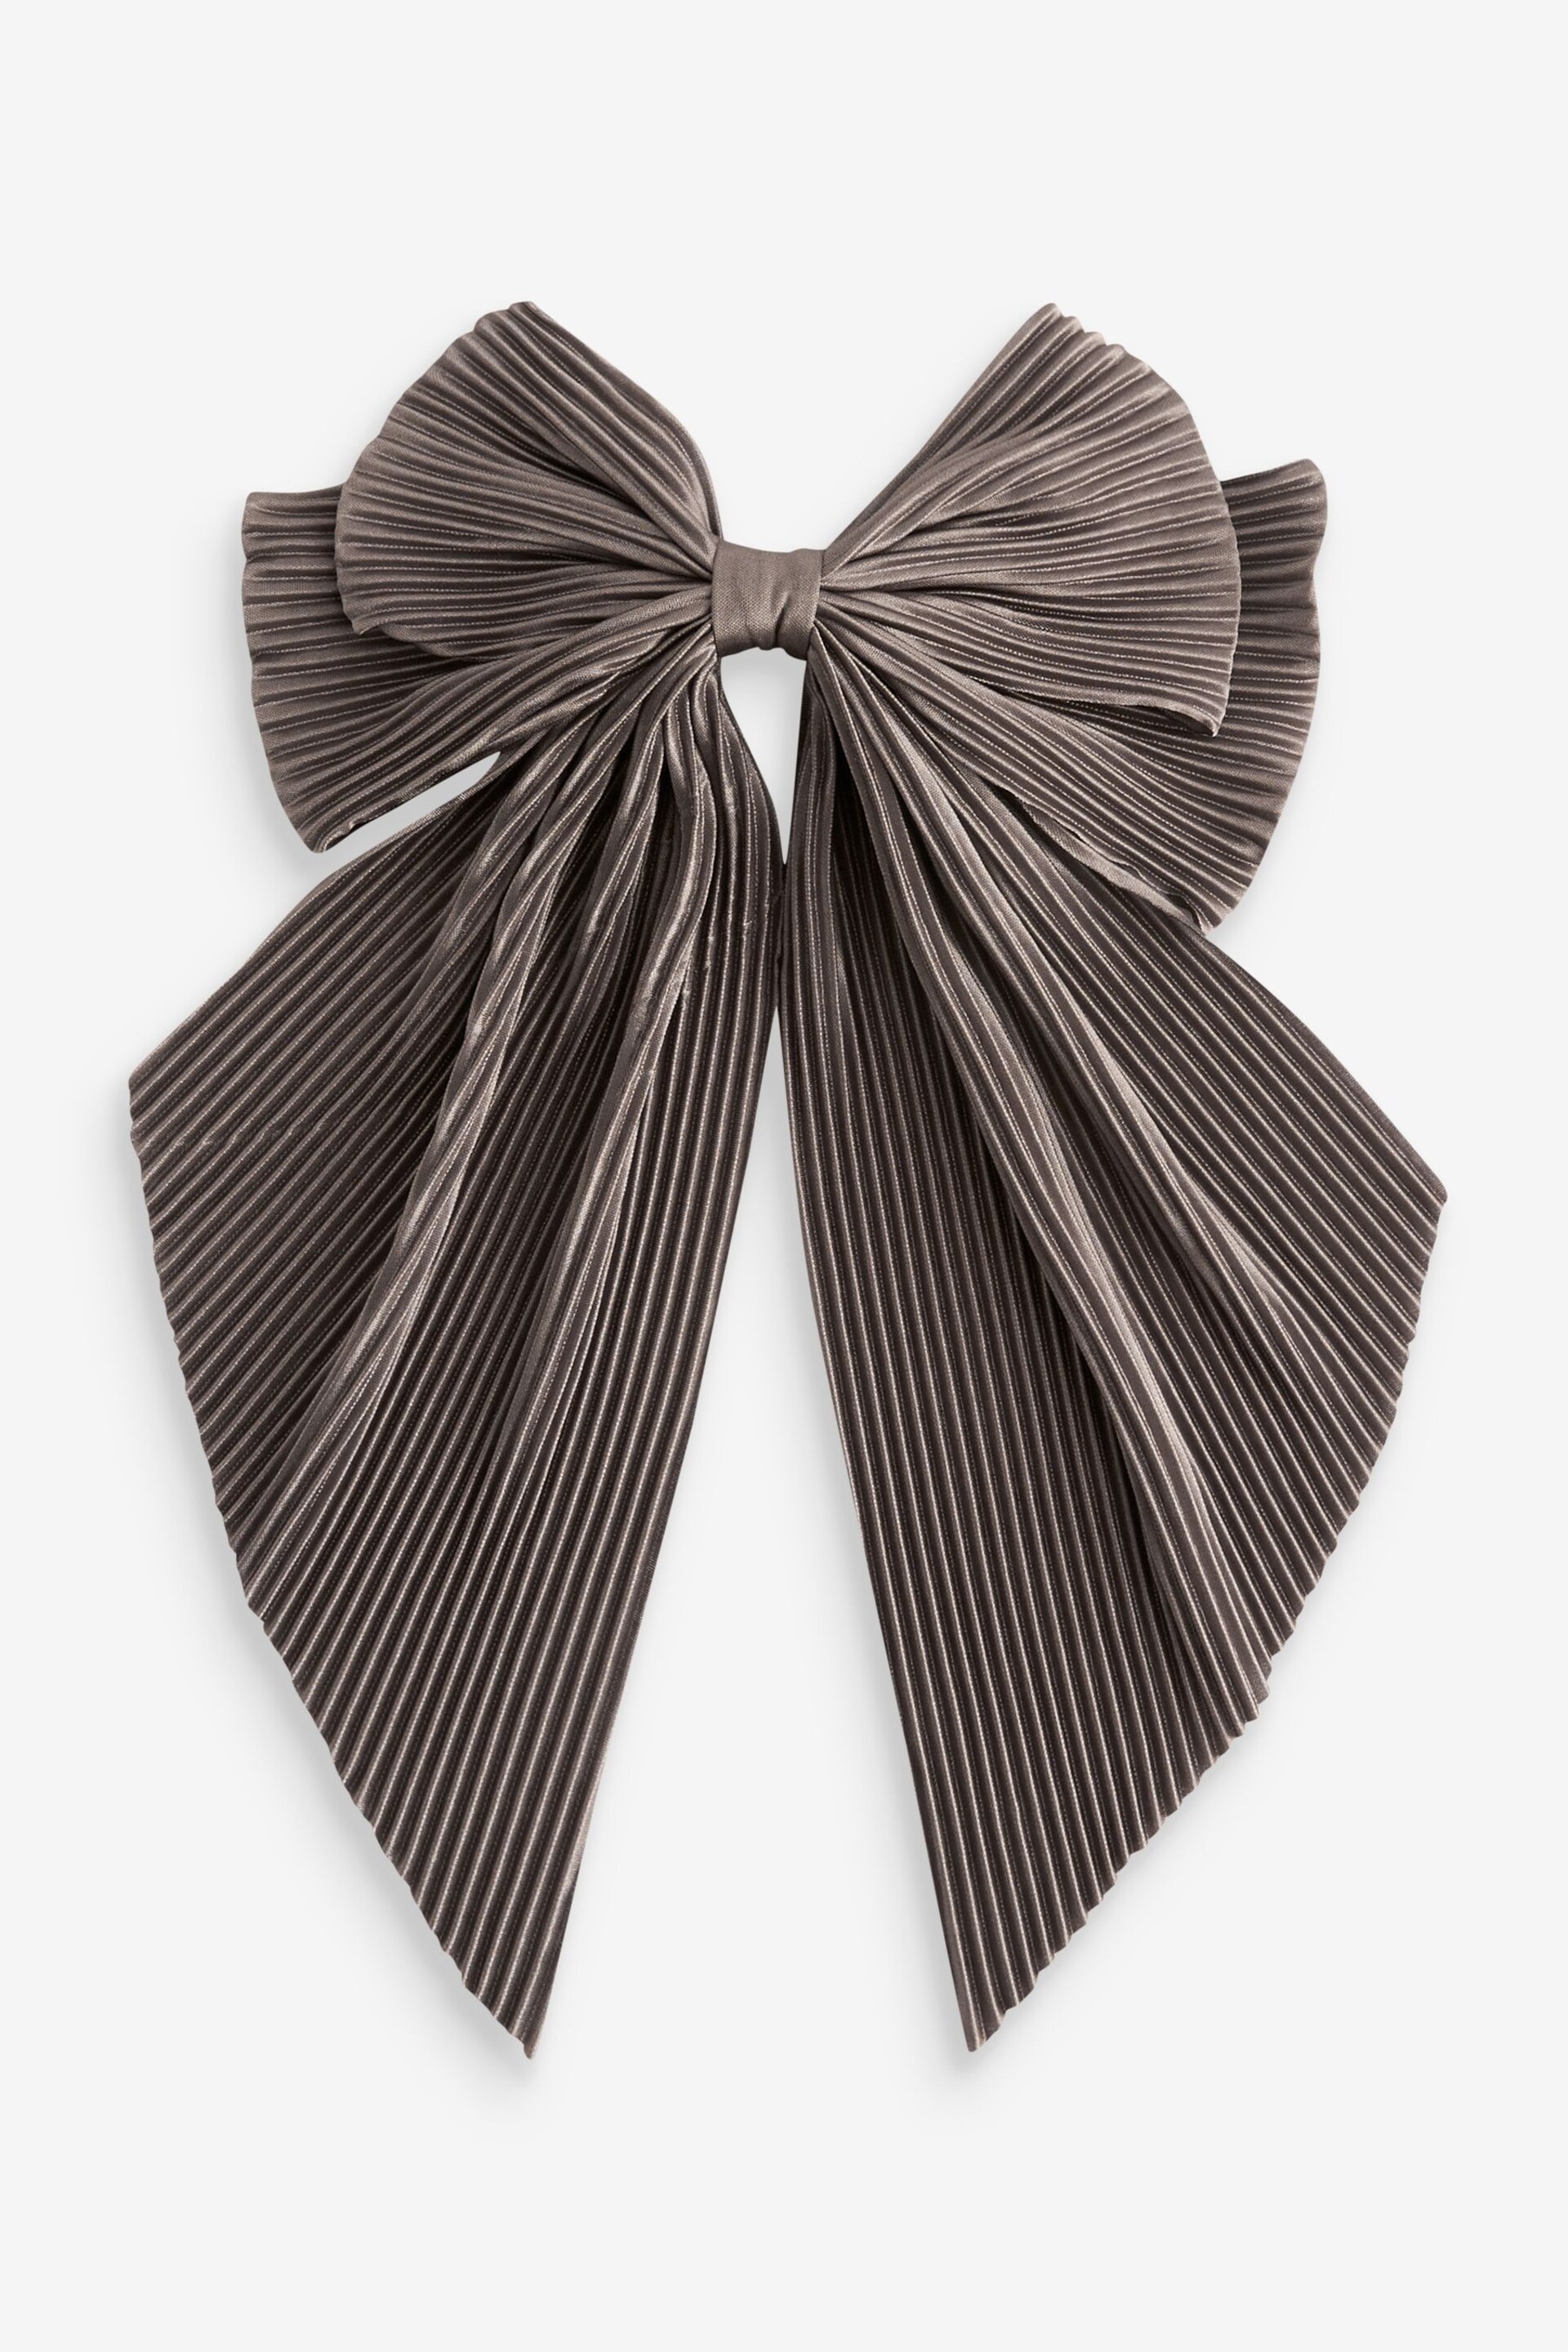 Mink Brown Plisse Bow Hairclip - Image 2 of 2